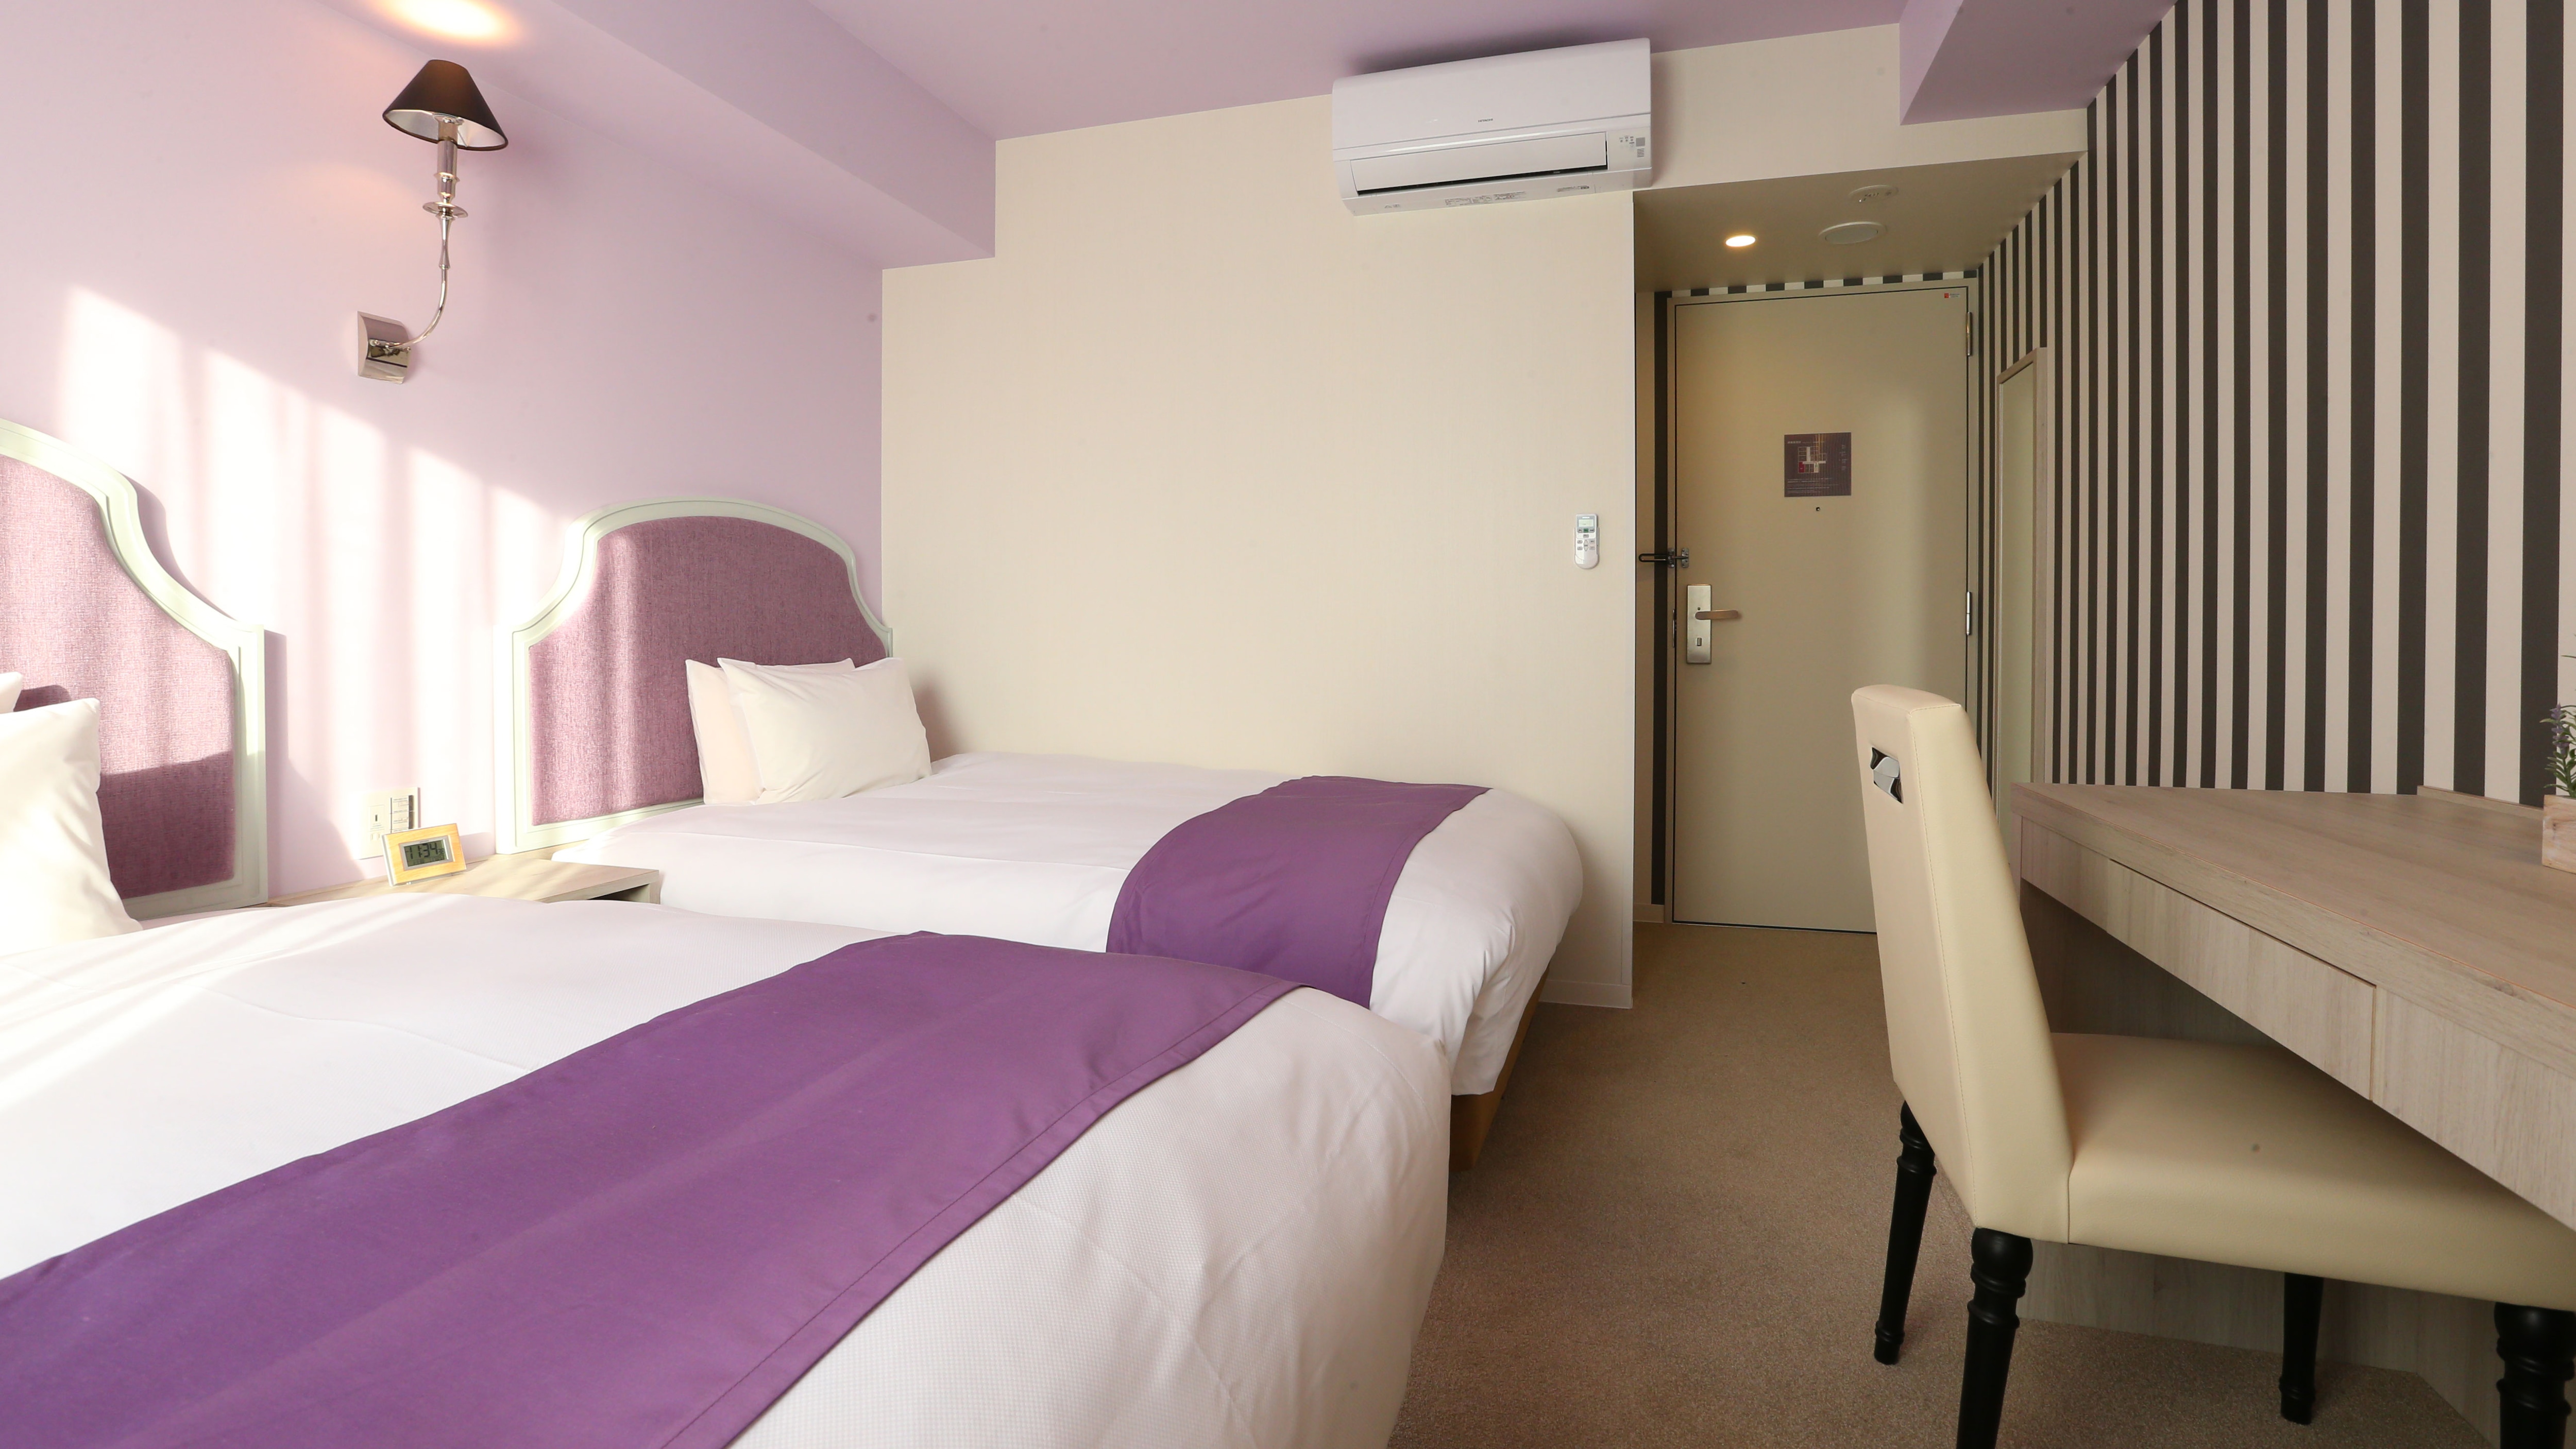 An example of the 8th floor lavender (twin) guest room